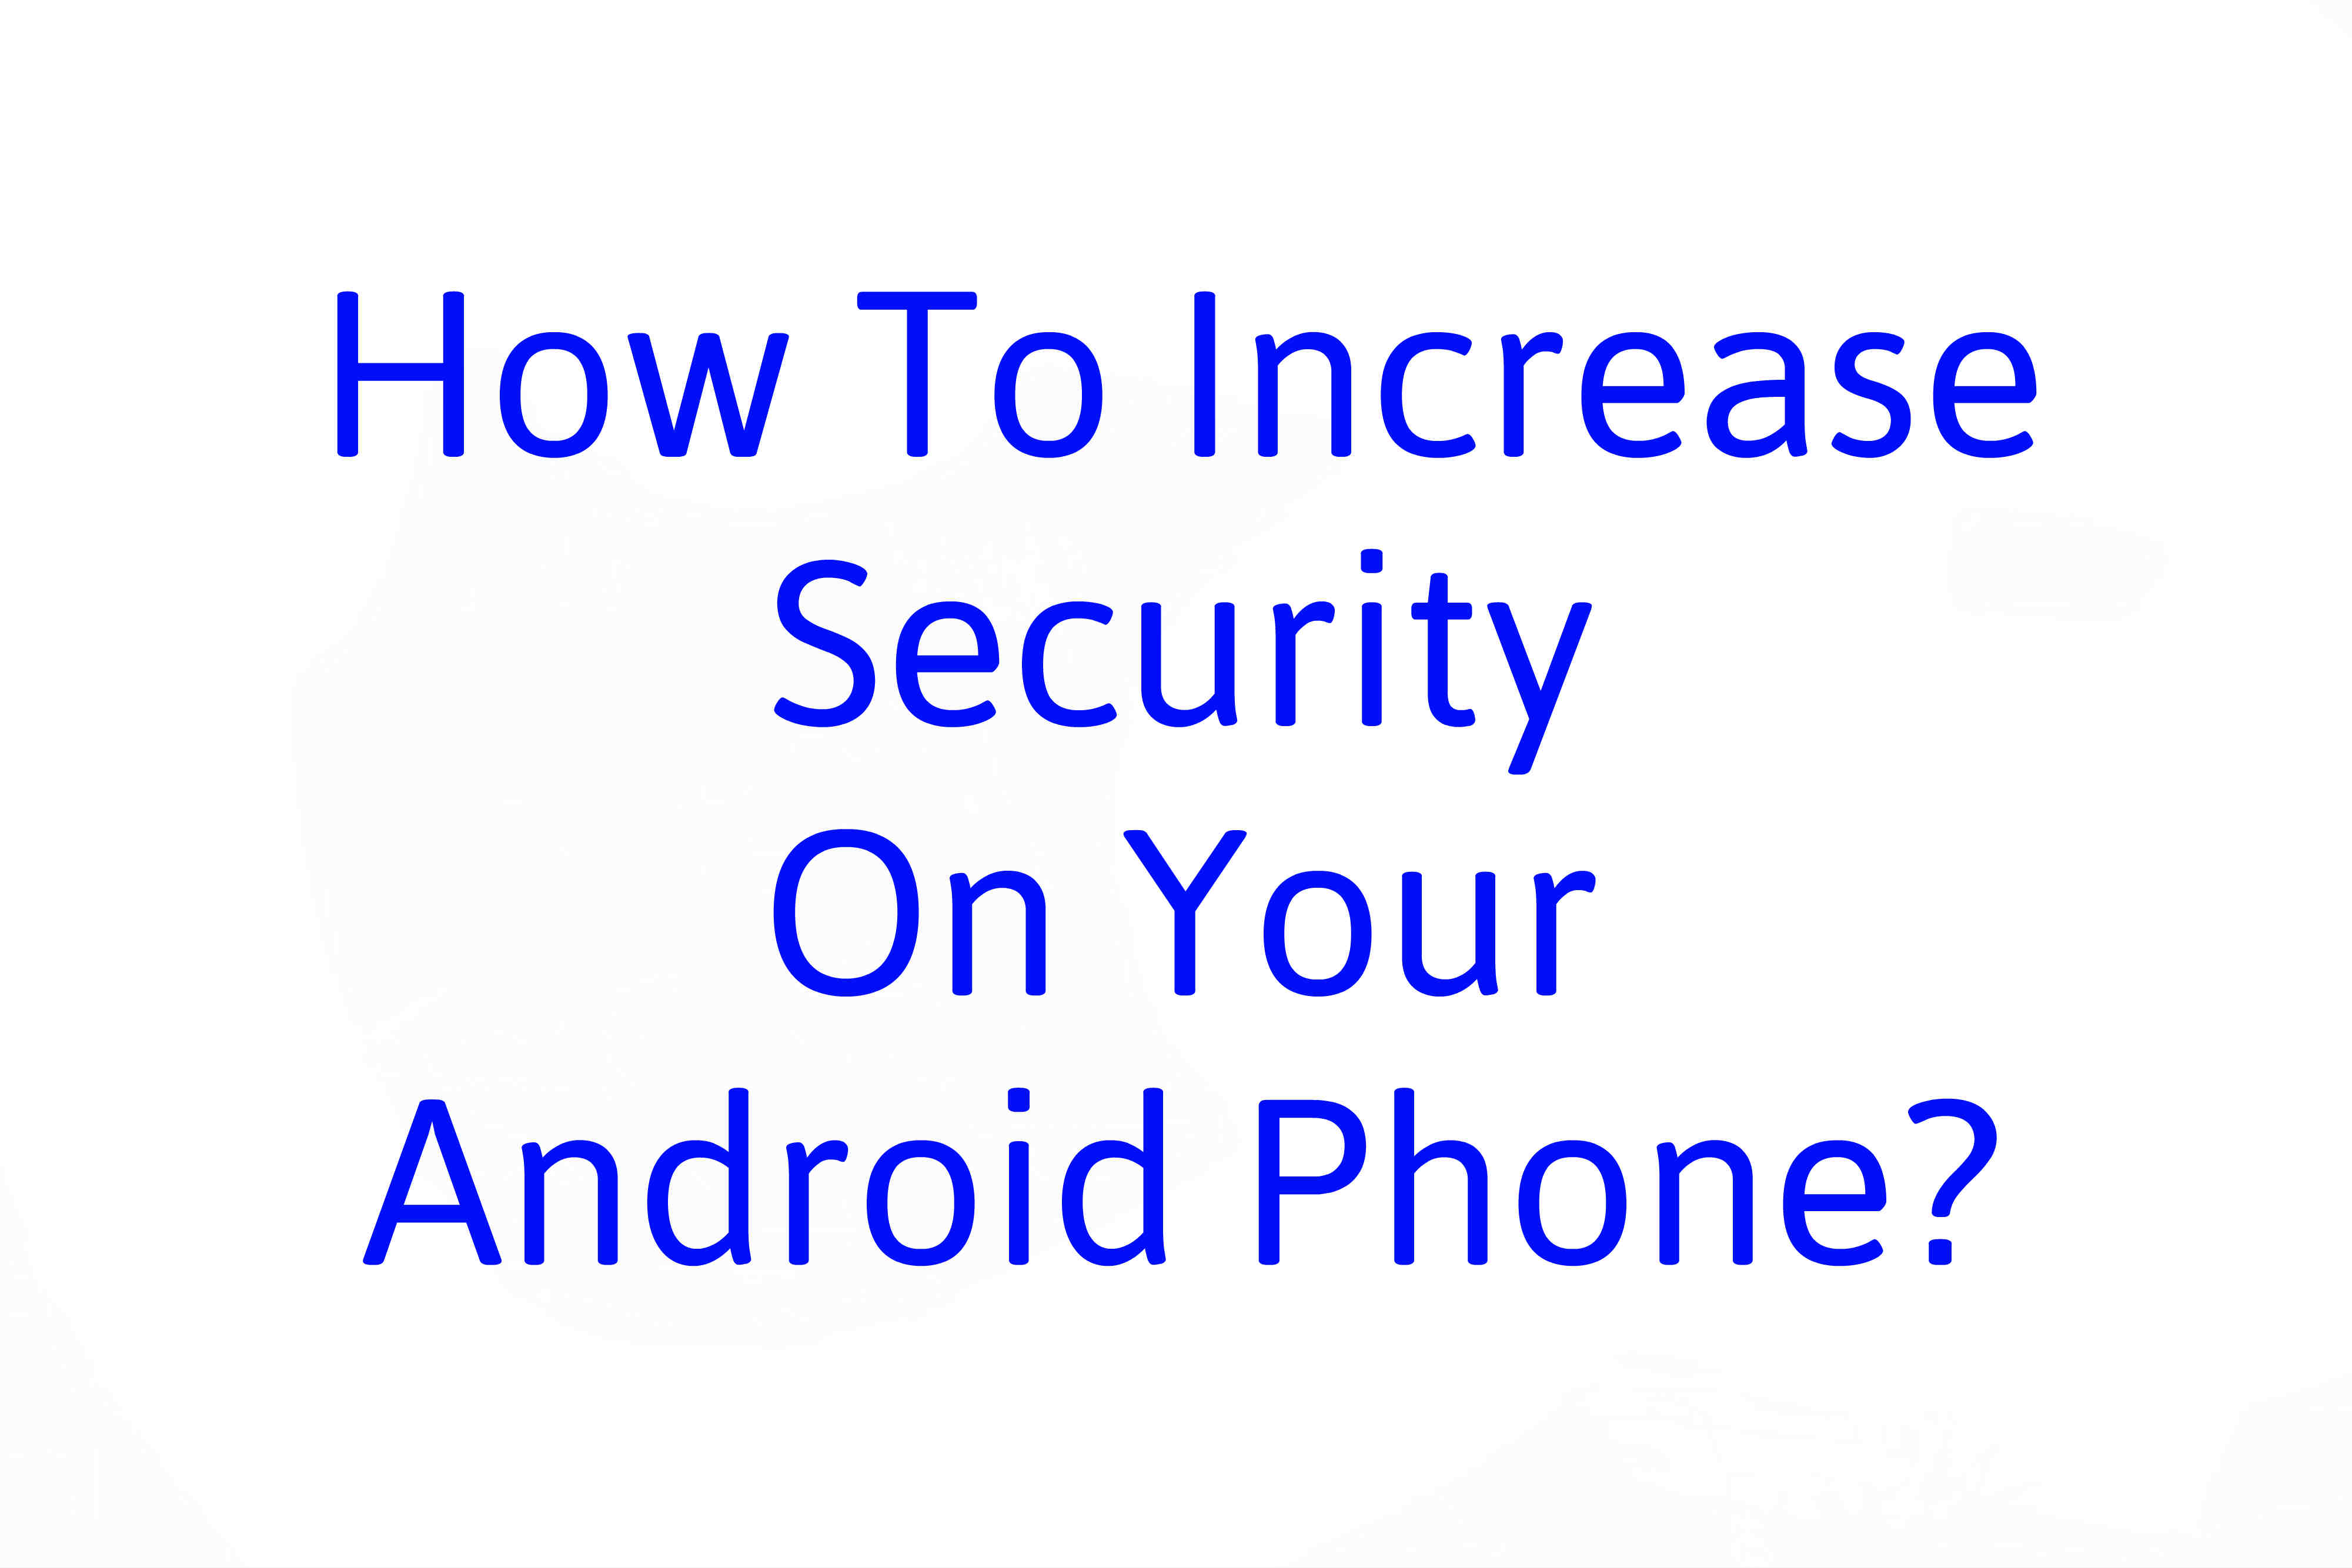 How To Increase Security On Your Android Phone